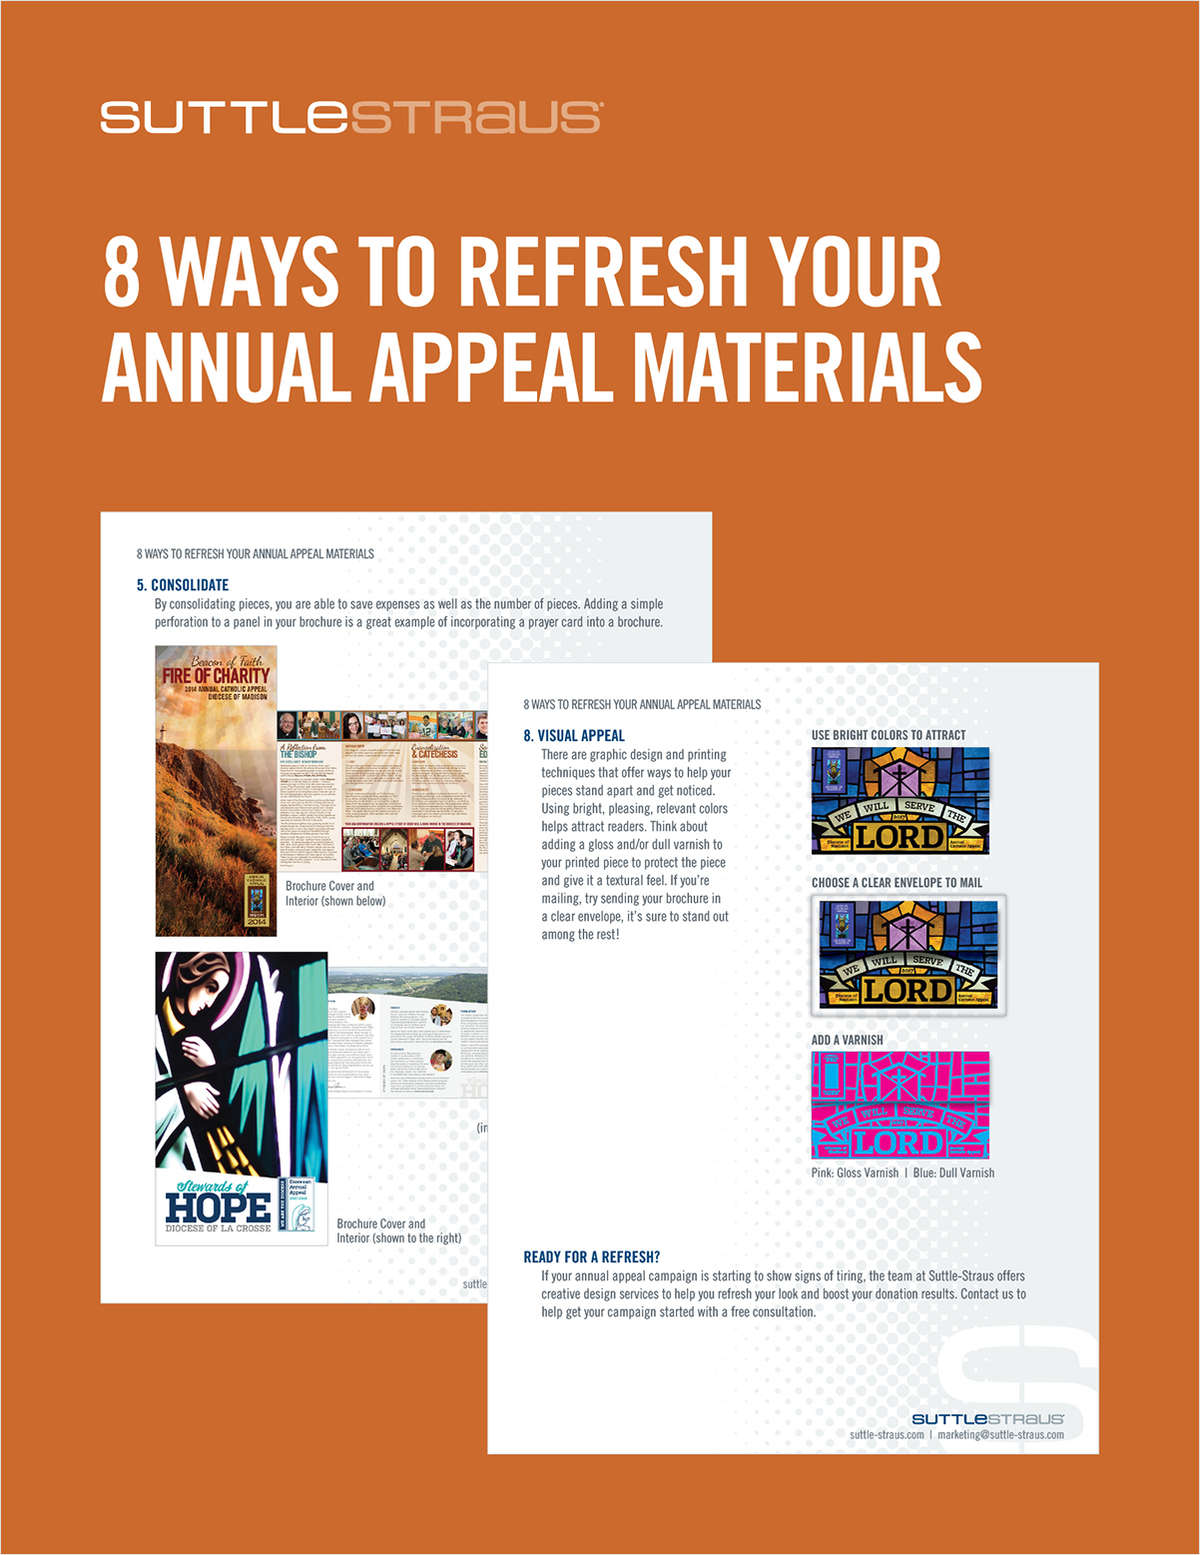 8 Ways to Refresh Your Annual Appeal Materials